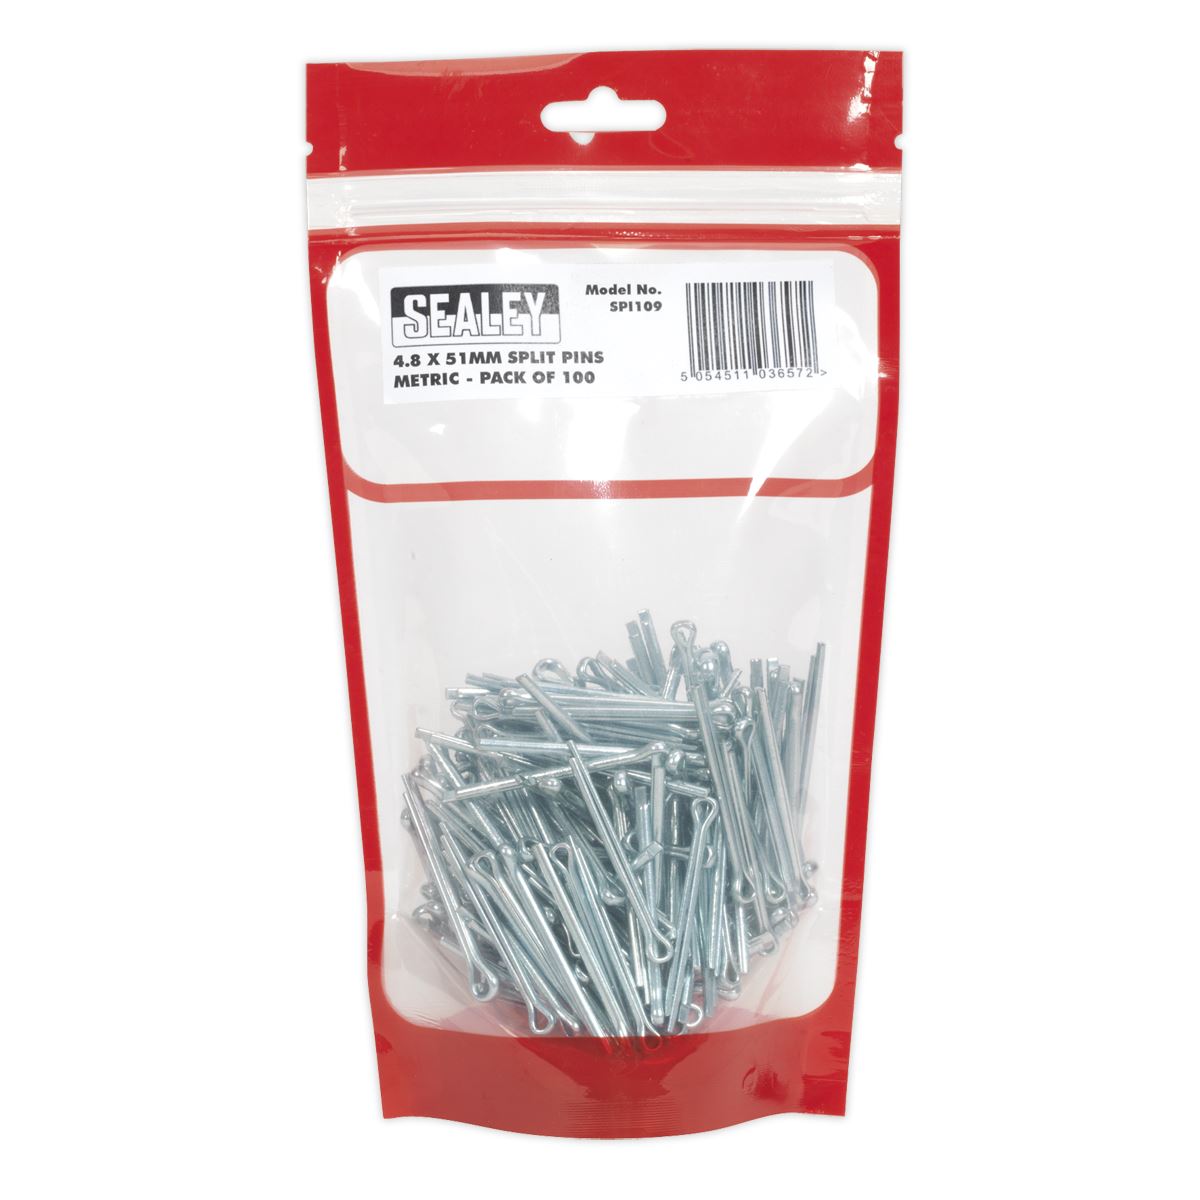 Sealey Split Pin 4.8 x 51mm Pack of 100